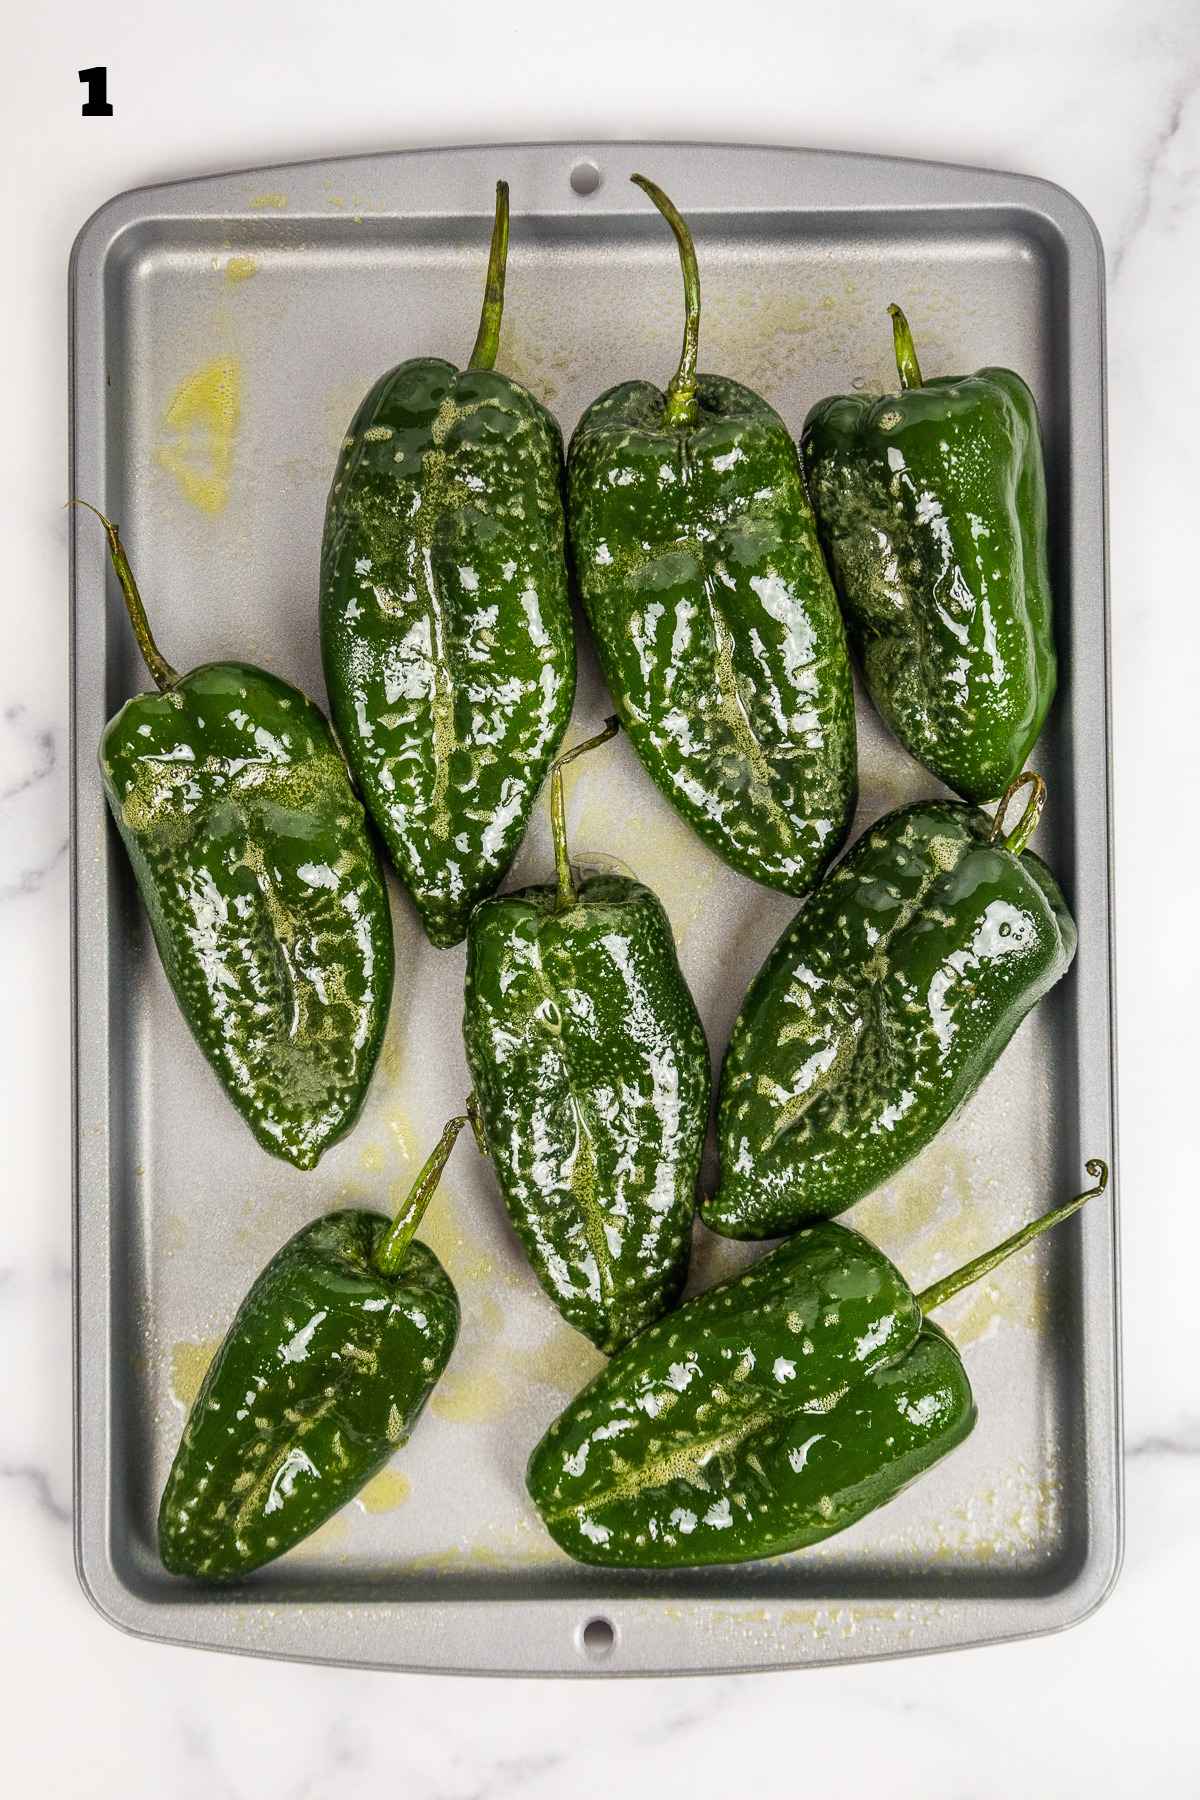 Raw peppers sprayed with cooking spray and on a baking sheet.